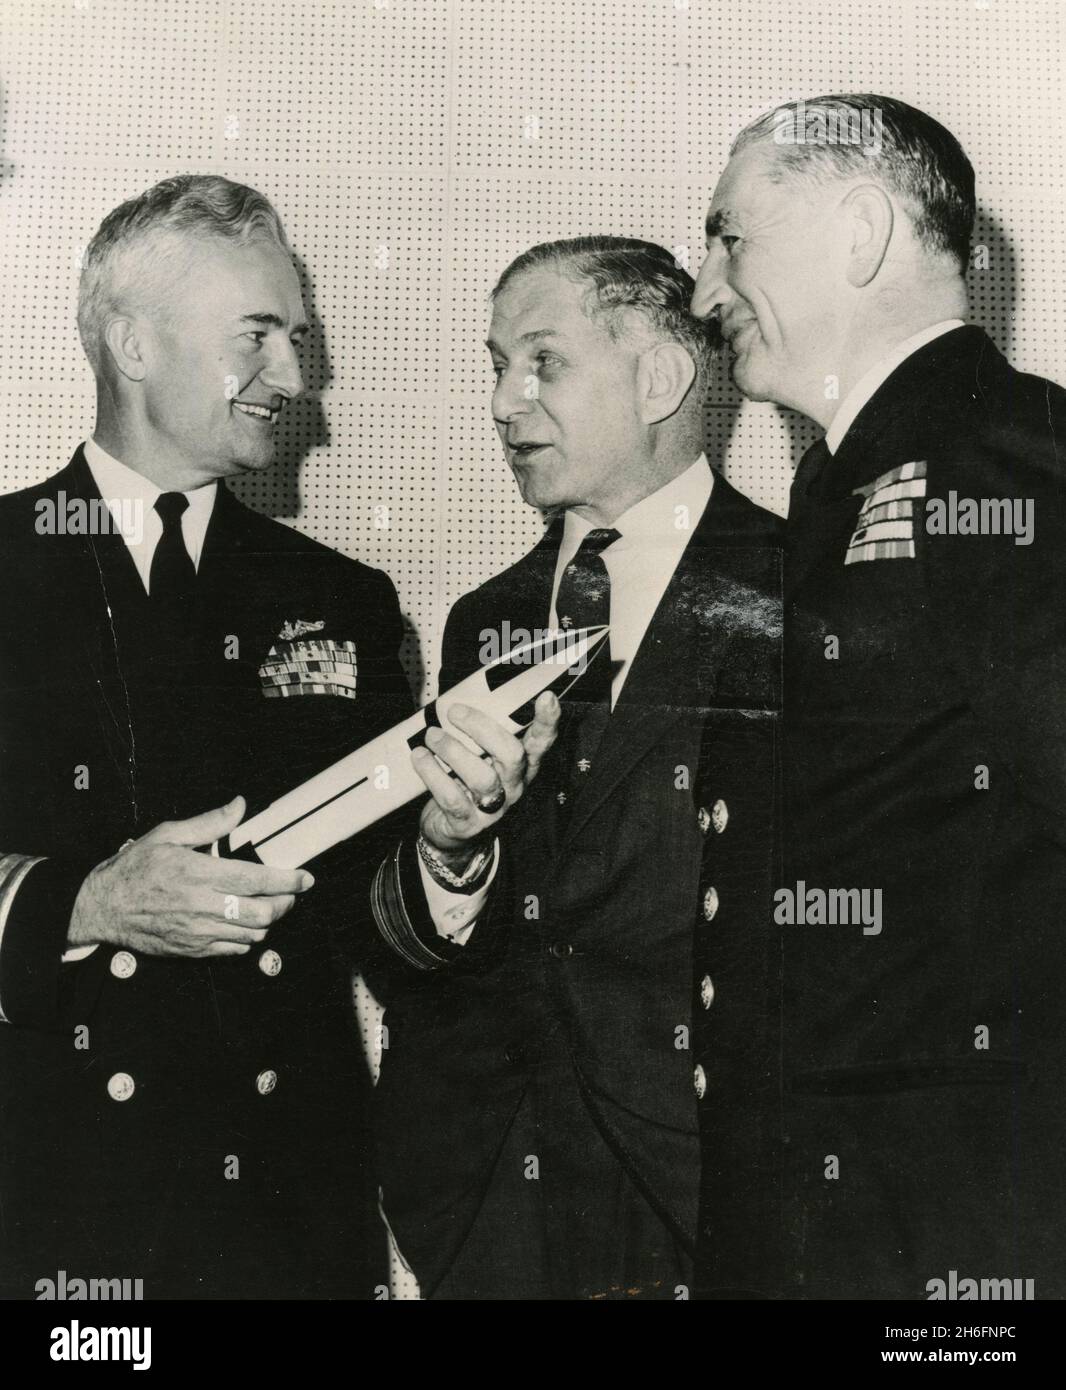 American and British officers, from left: US Navy Rear Admiral Ignatius J. Galatin; Sir Solly Zuckerman, chief scientist of British Ministry of Defense; and Vice Admiral Sir Varyl Begg Vice Chief of the British Naval Staff, looking at a model of Polaris missiles, USA 1963 Stock Photo